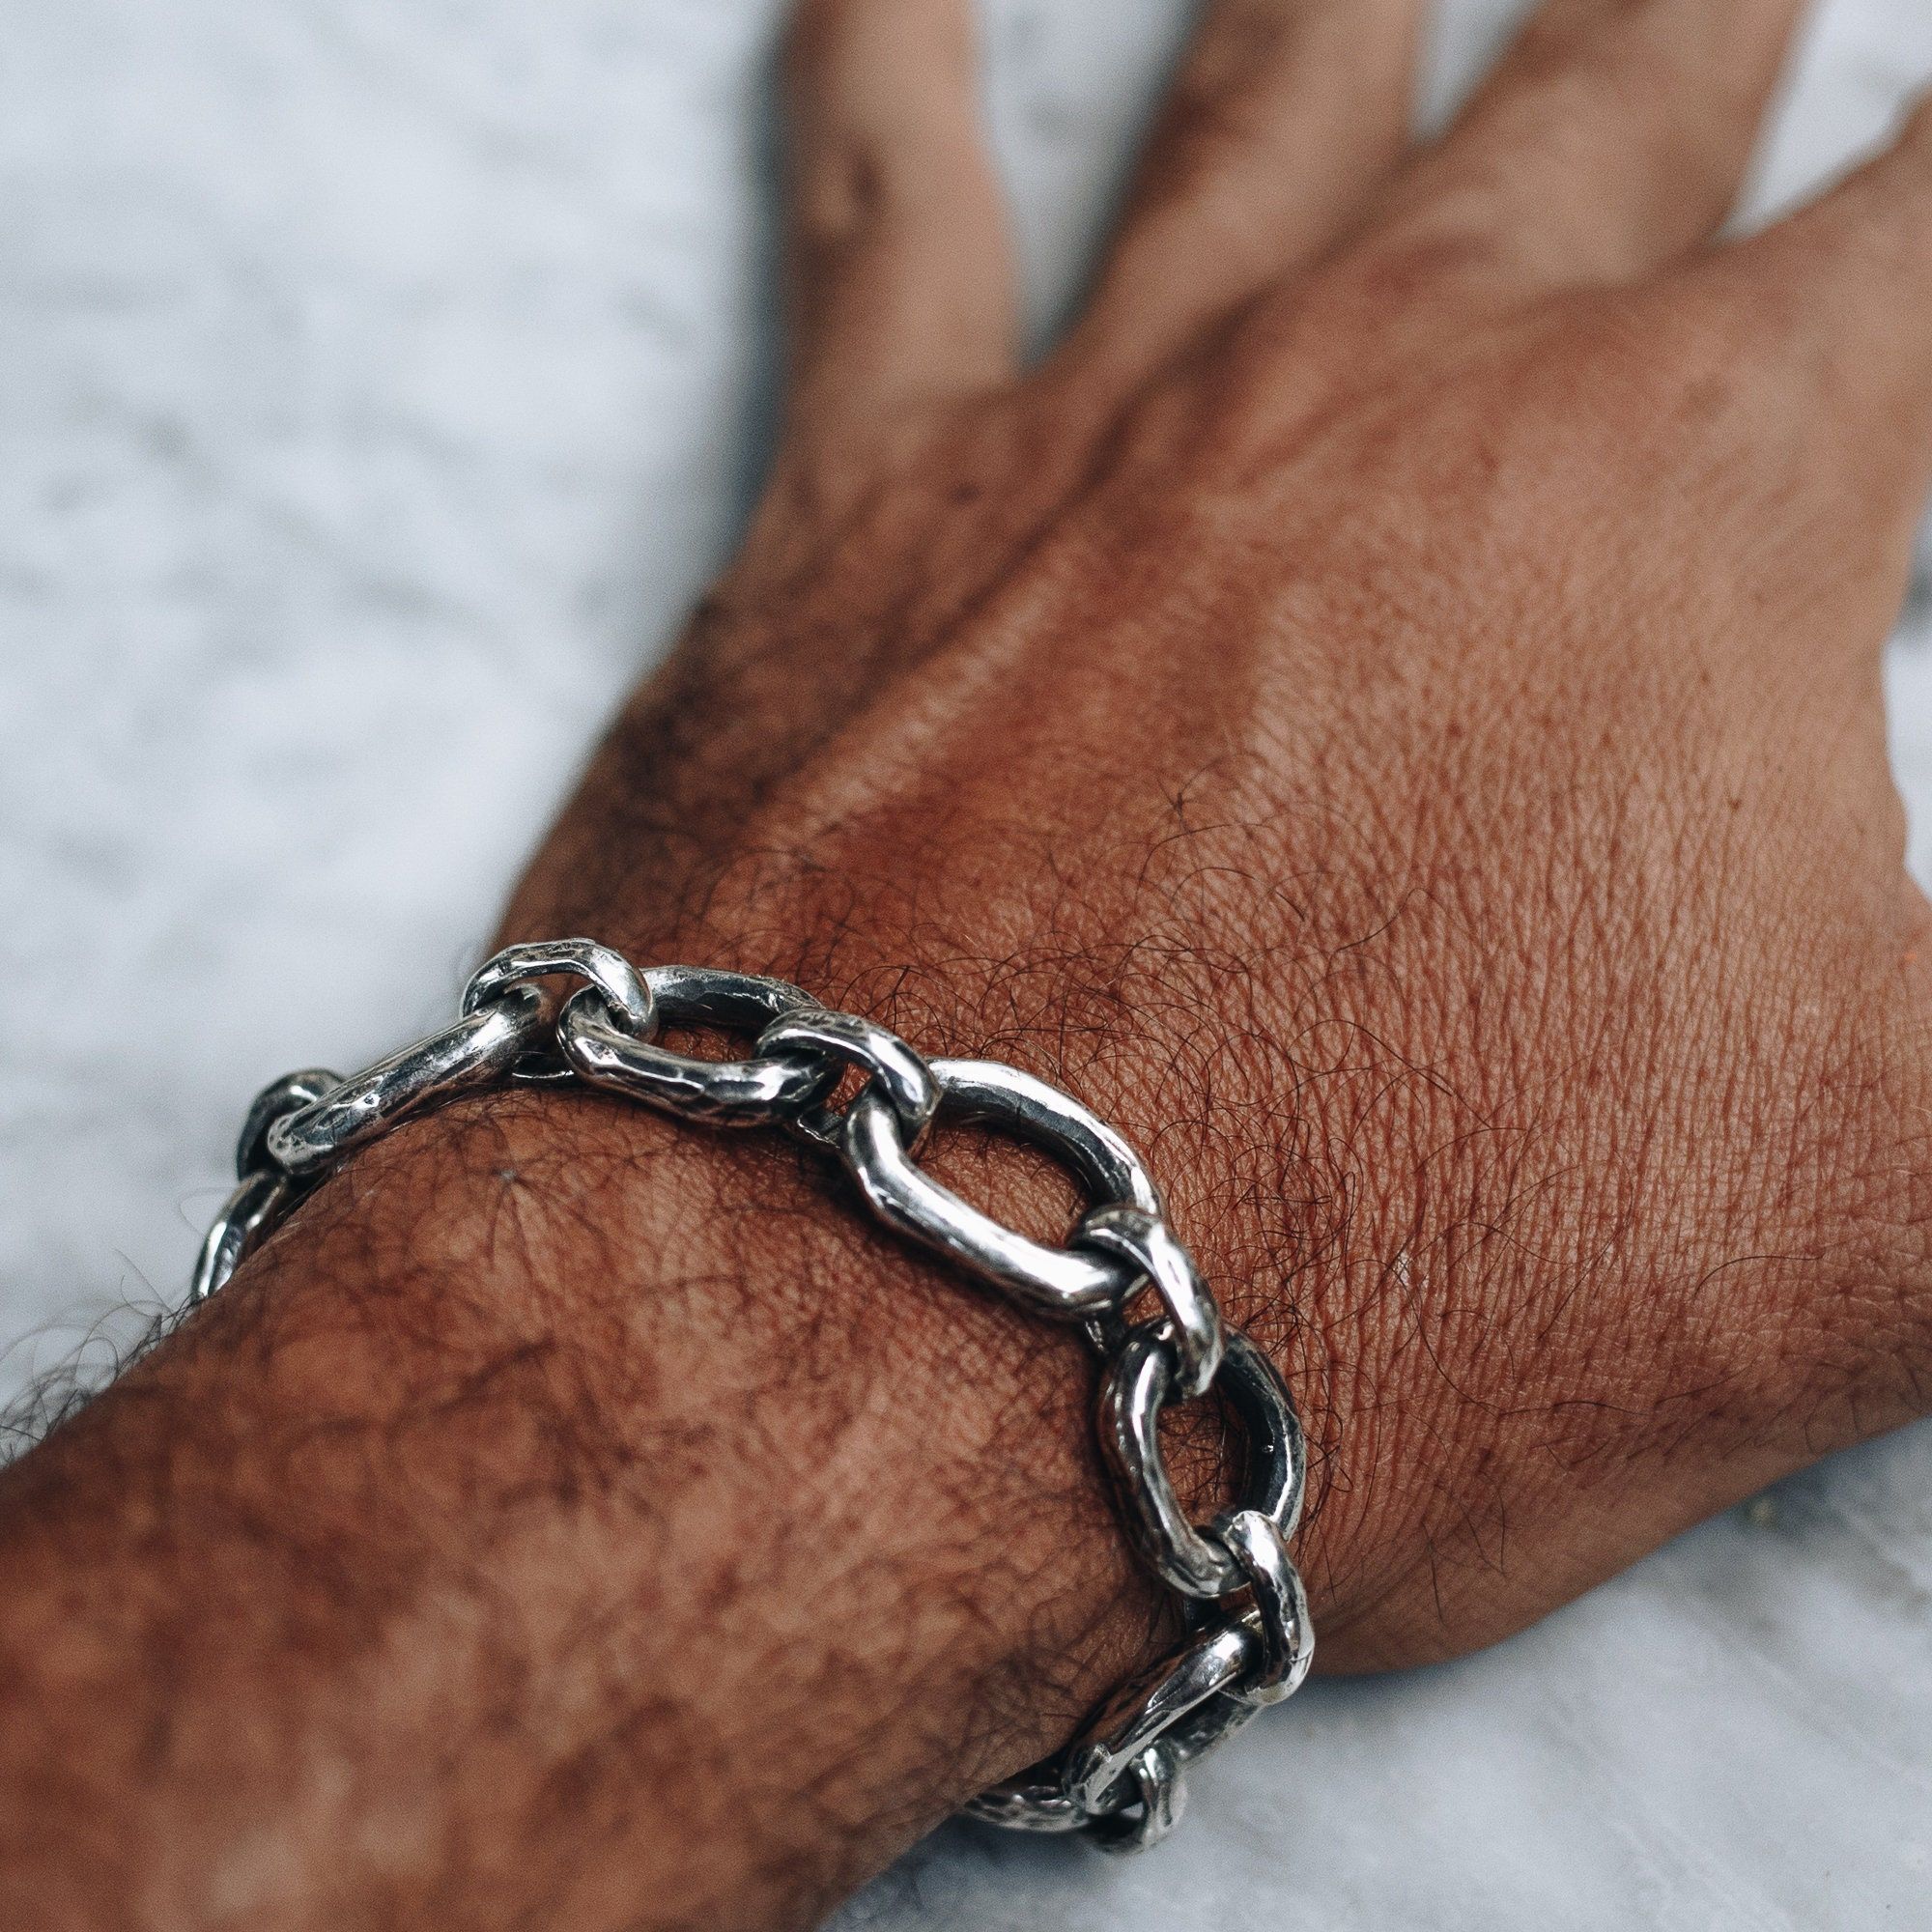 Masculine Elegance: Stylish Silver Chains for Men’s Jewelry